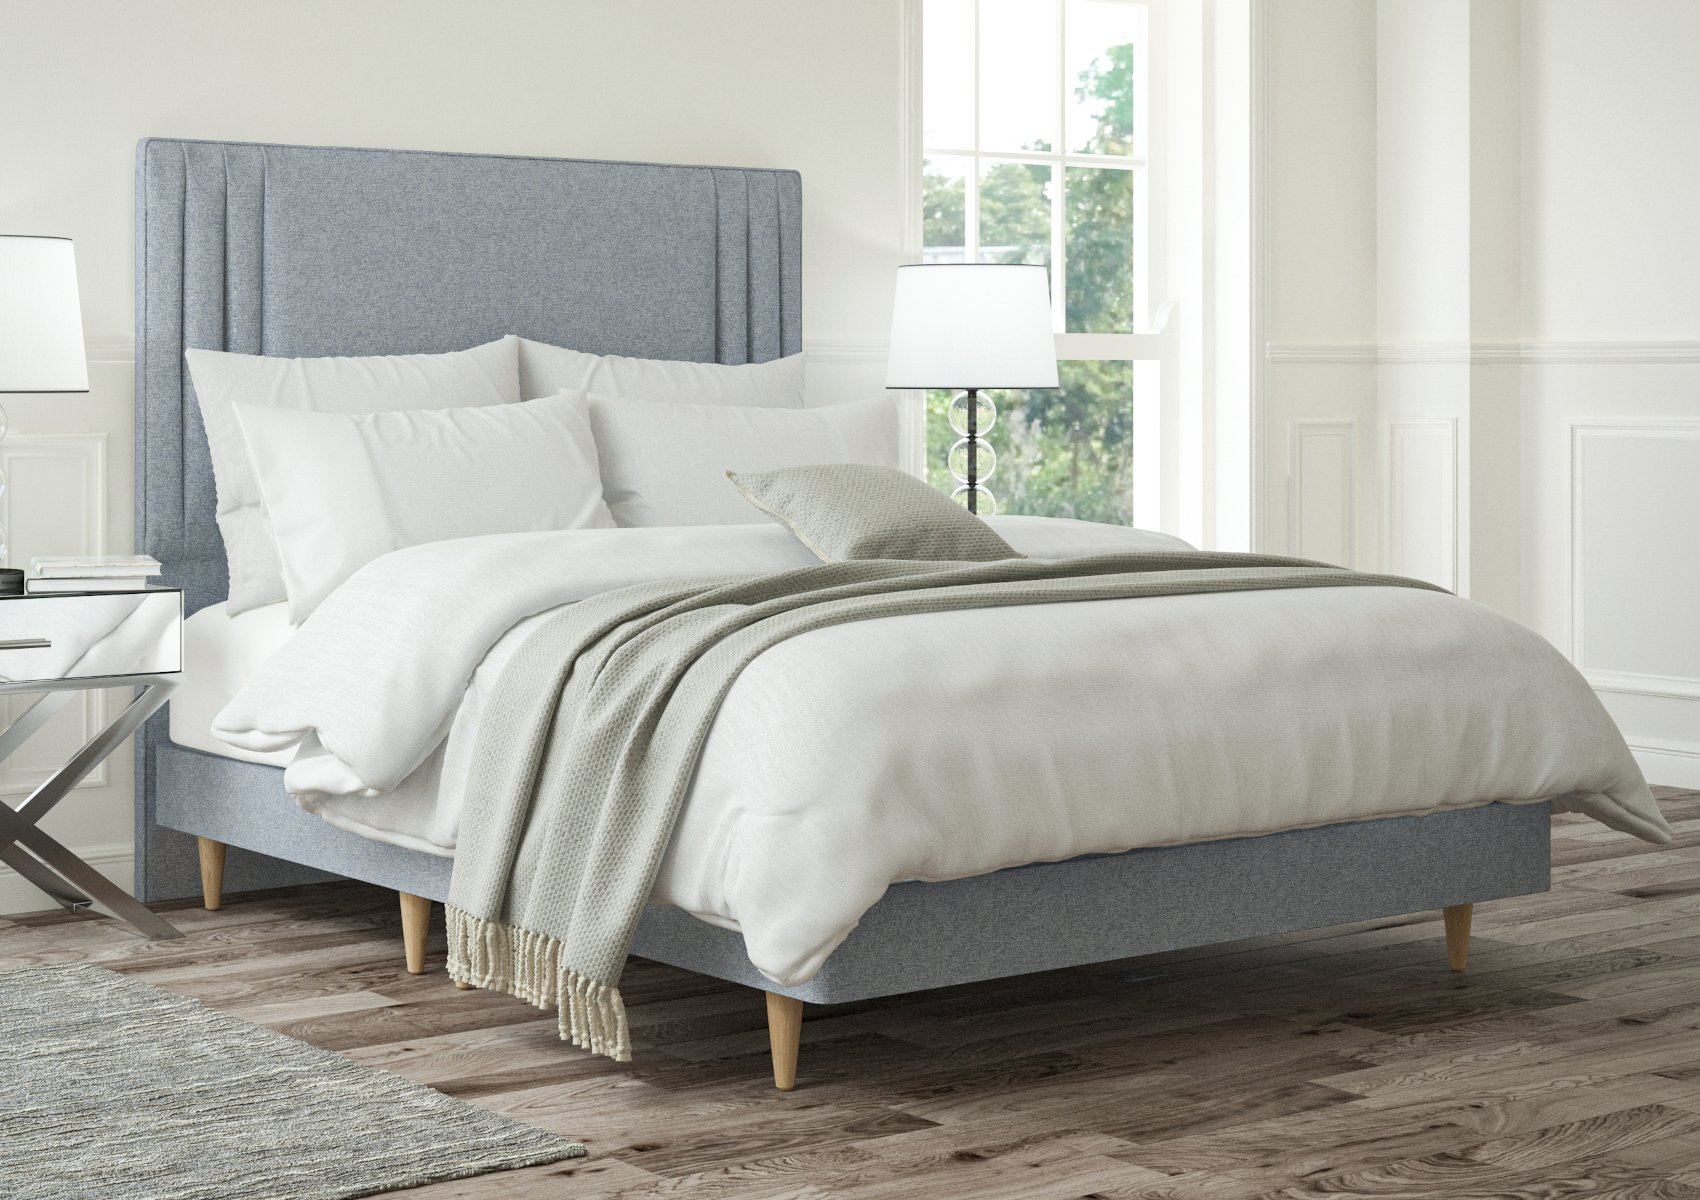 View Faith Arran Natural Upholstered King Size Bed Time4Sleep information